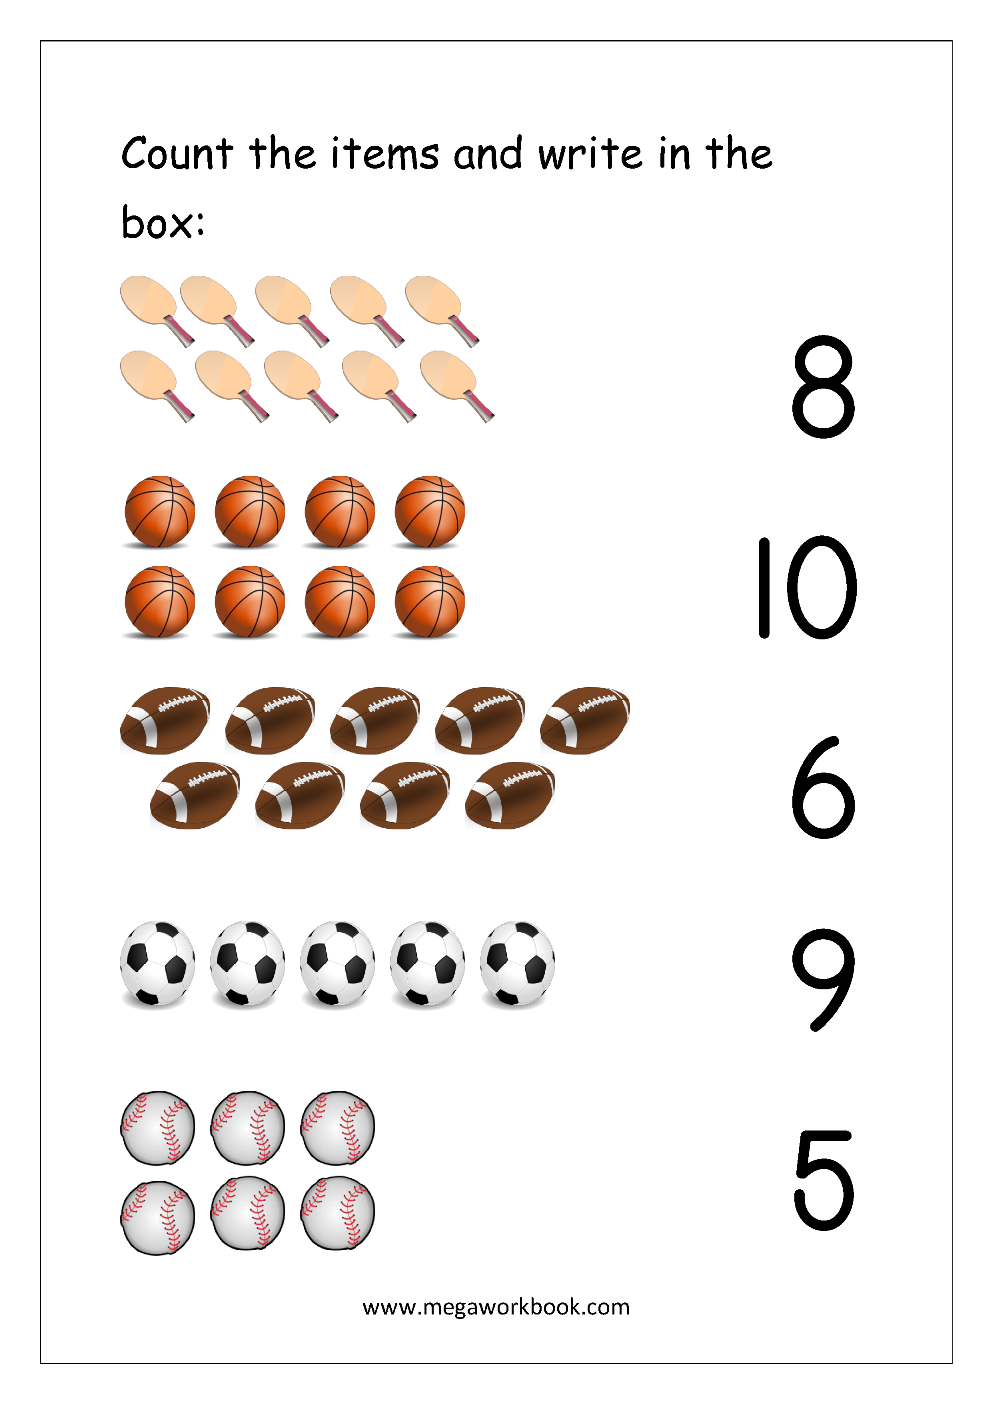 free printable number matching worksheets for kindergarten and preschool count and match 1 10 megaworkbook